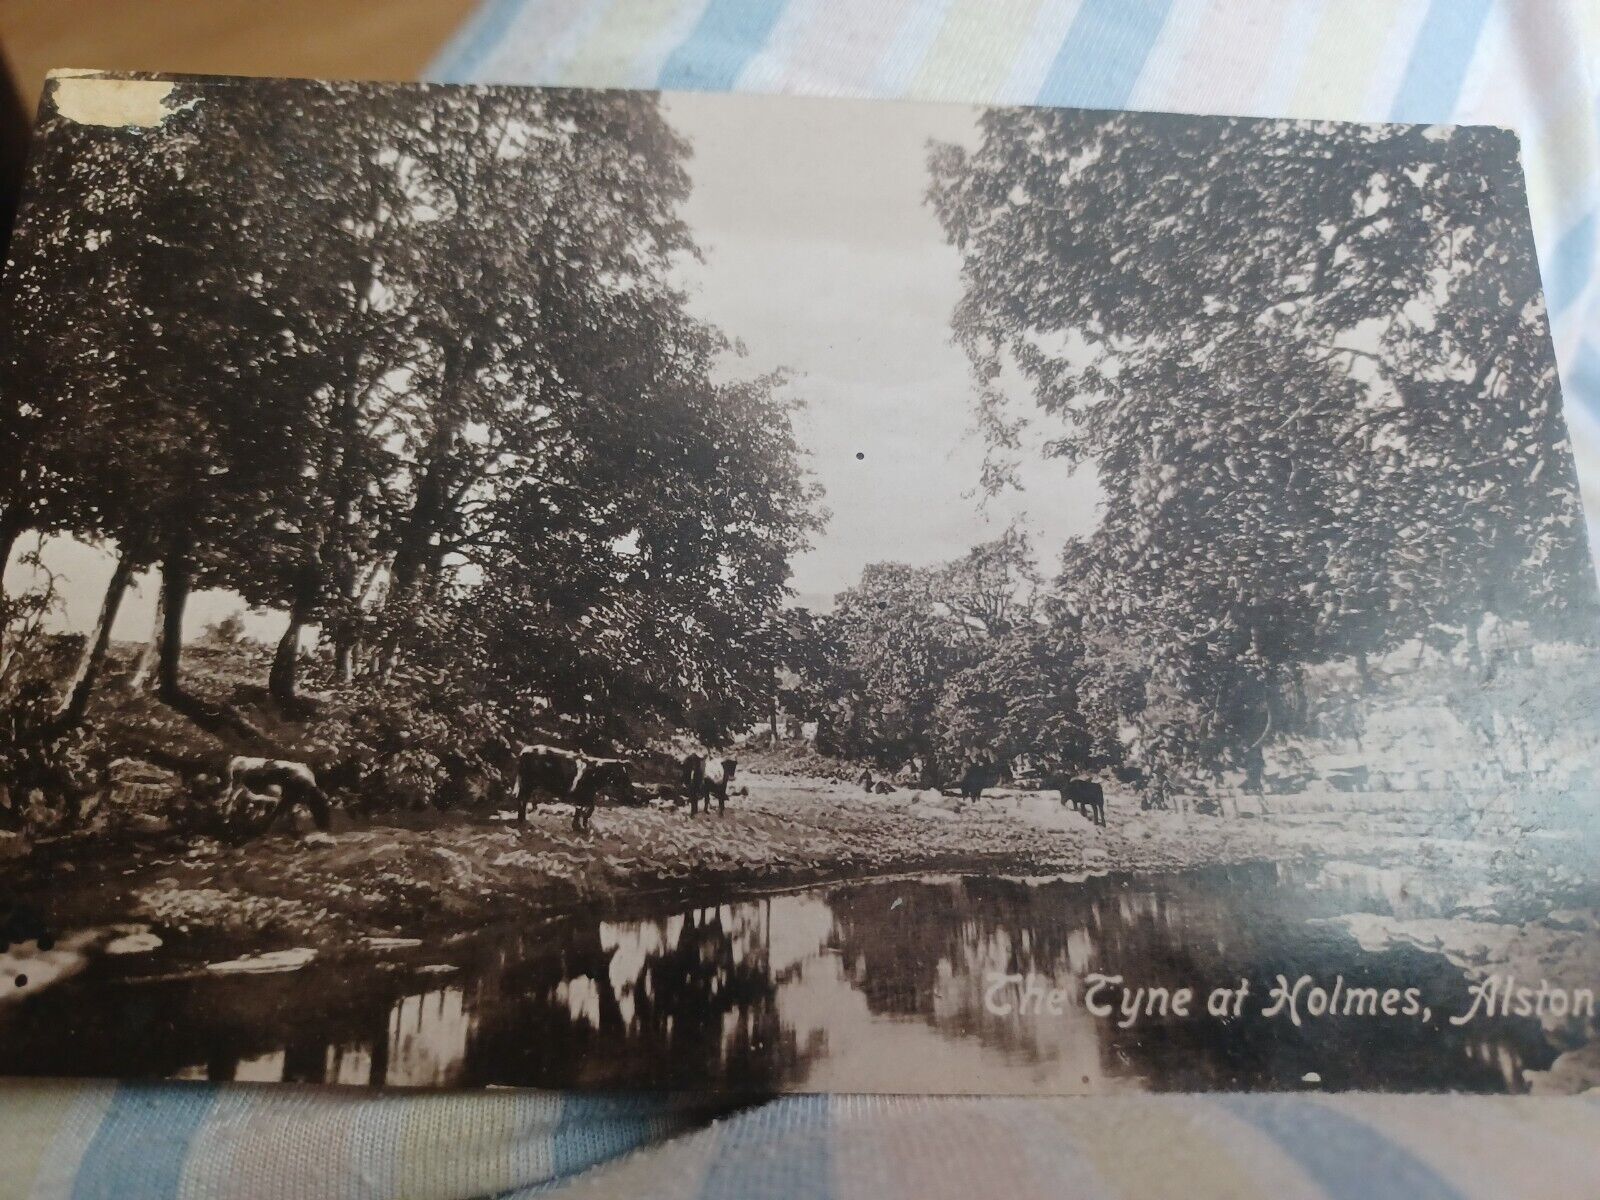 House Clearance -  Vintage Service The Tyne at Holmes, Alston. Postal date 1915